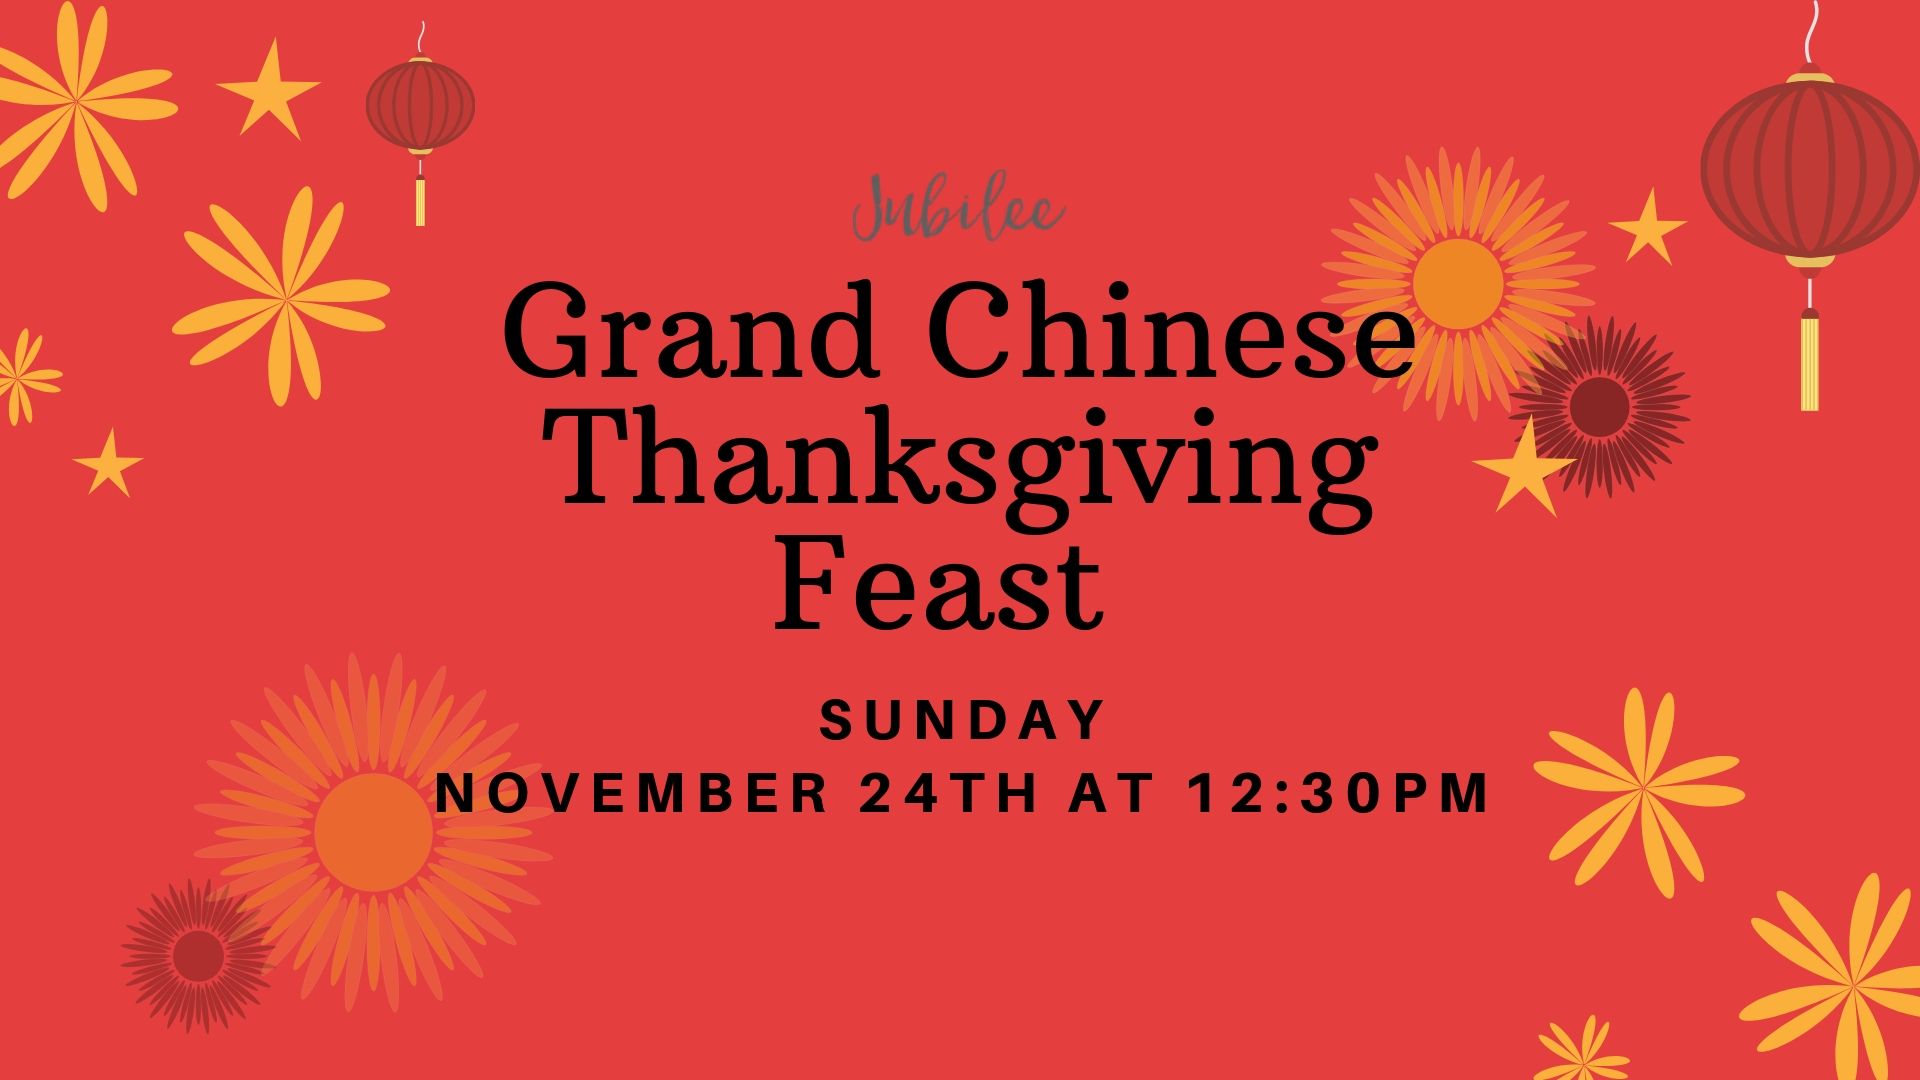 Jubilee Grand Chinese Thanksgiving Feast